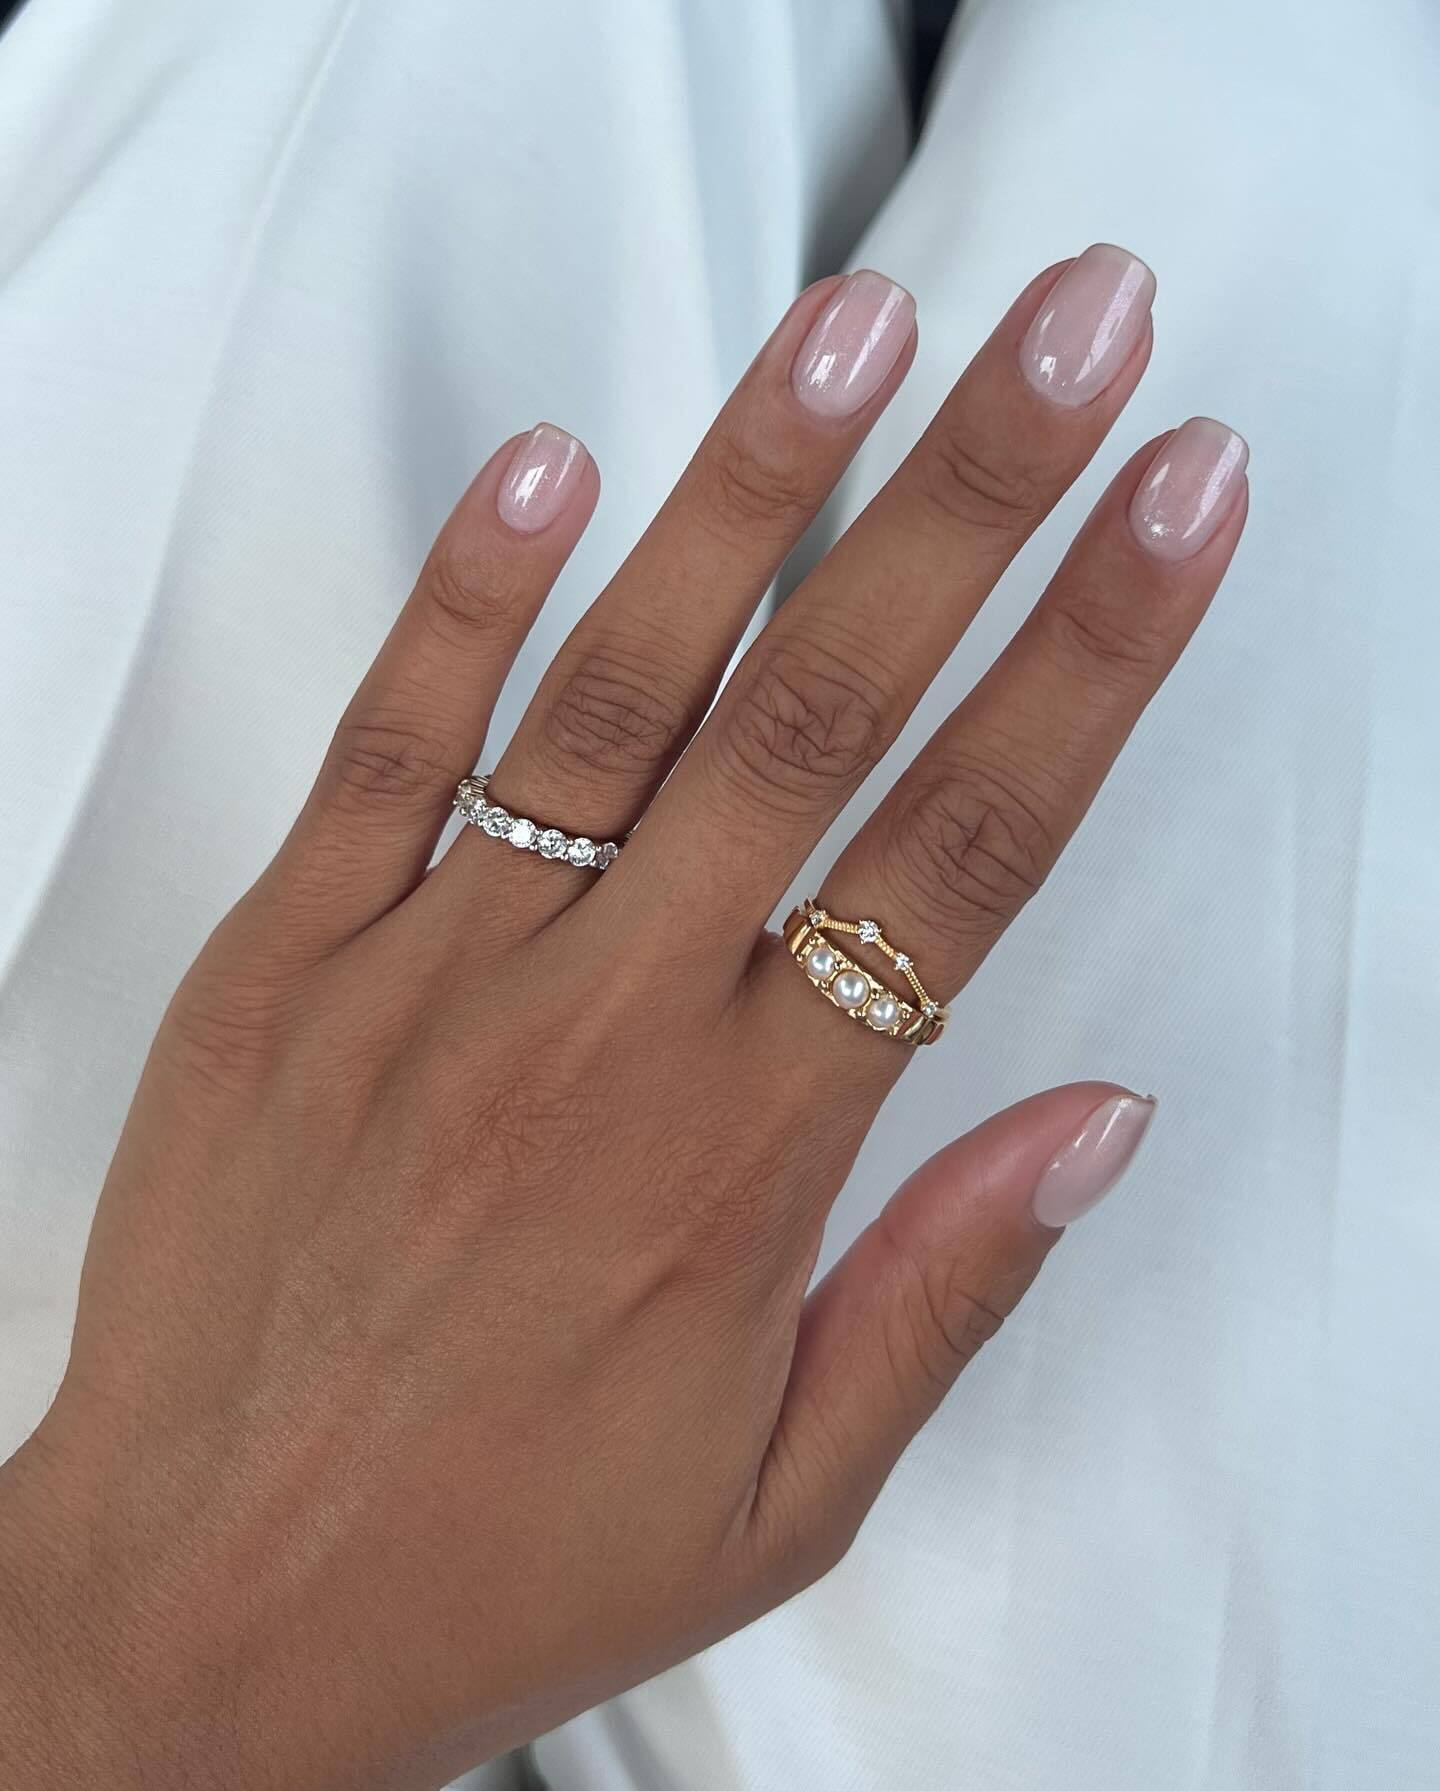 5 nail colors you'll see everywhere this January